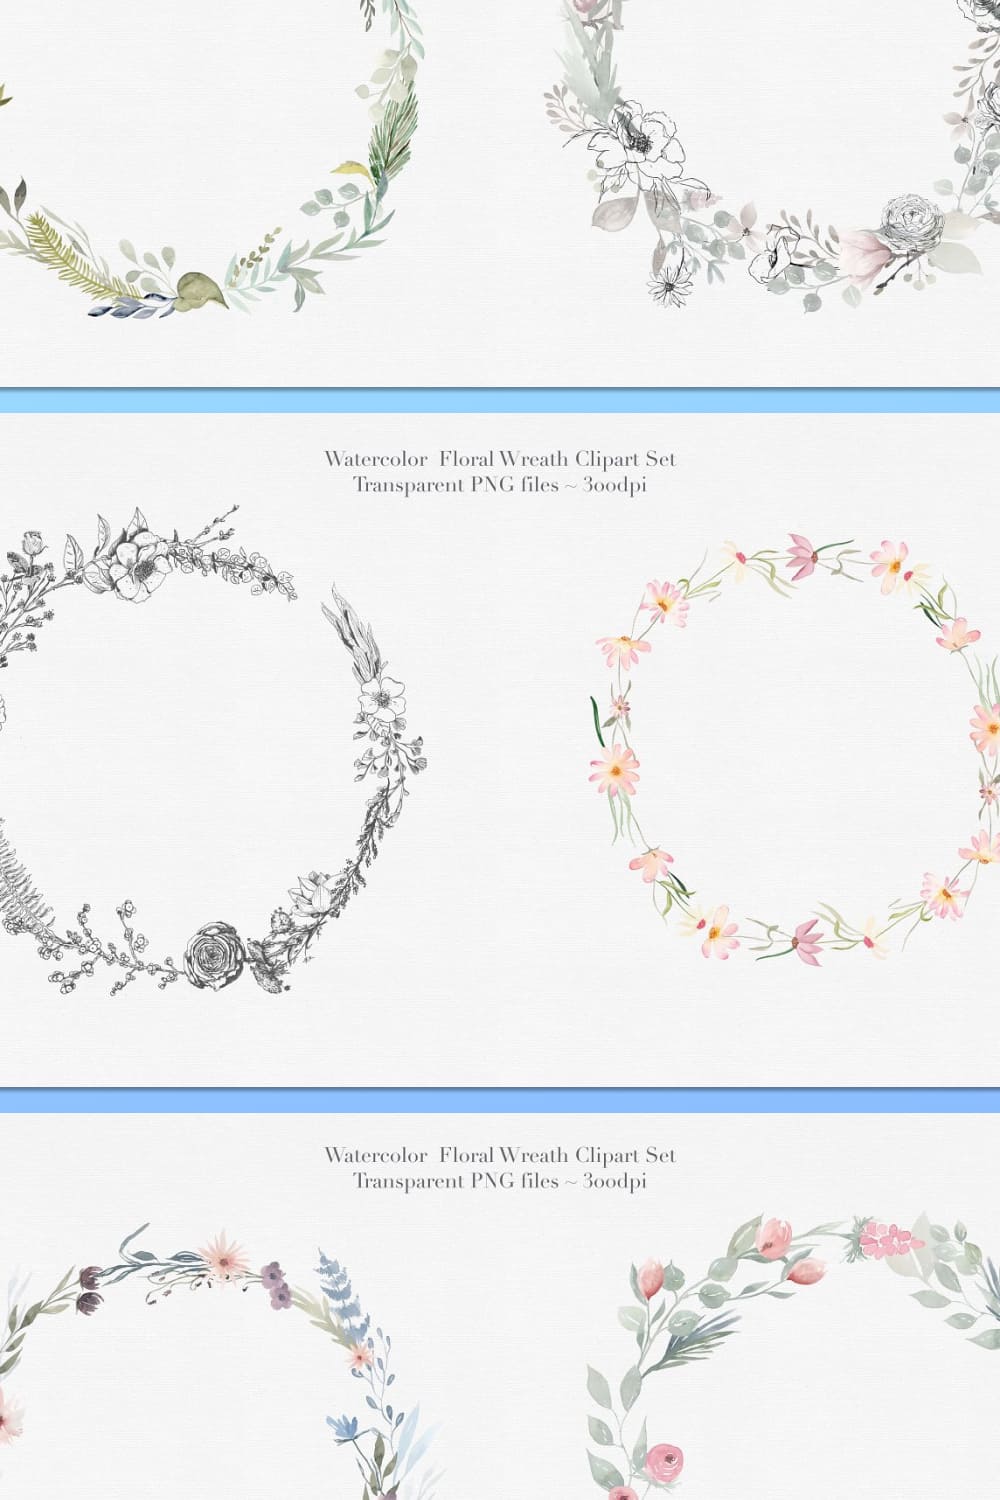 watercolor floral wreaths botanic collection.